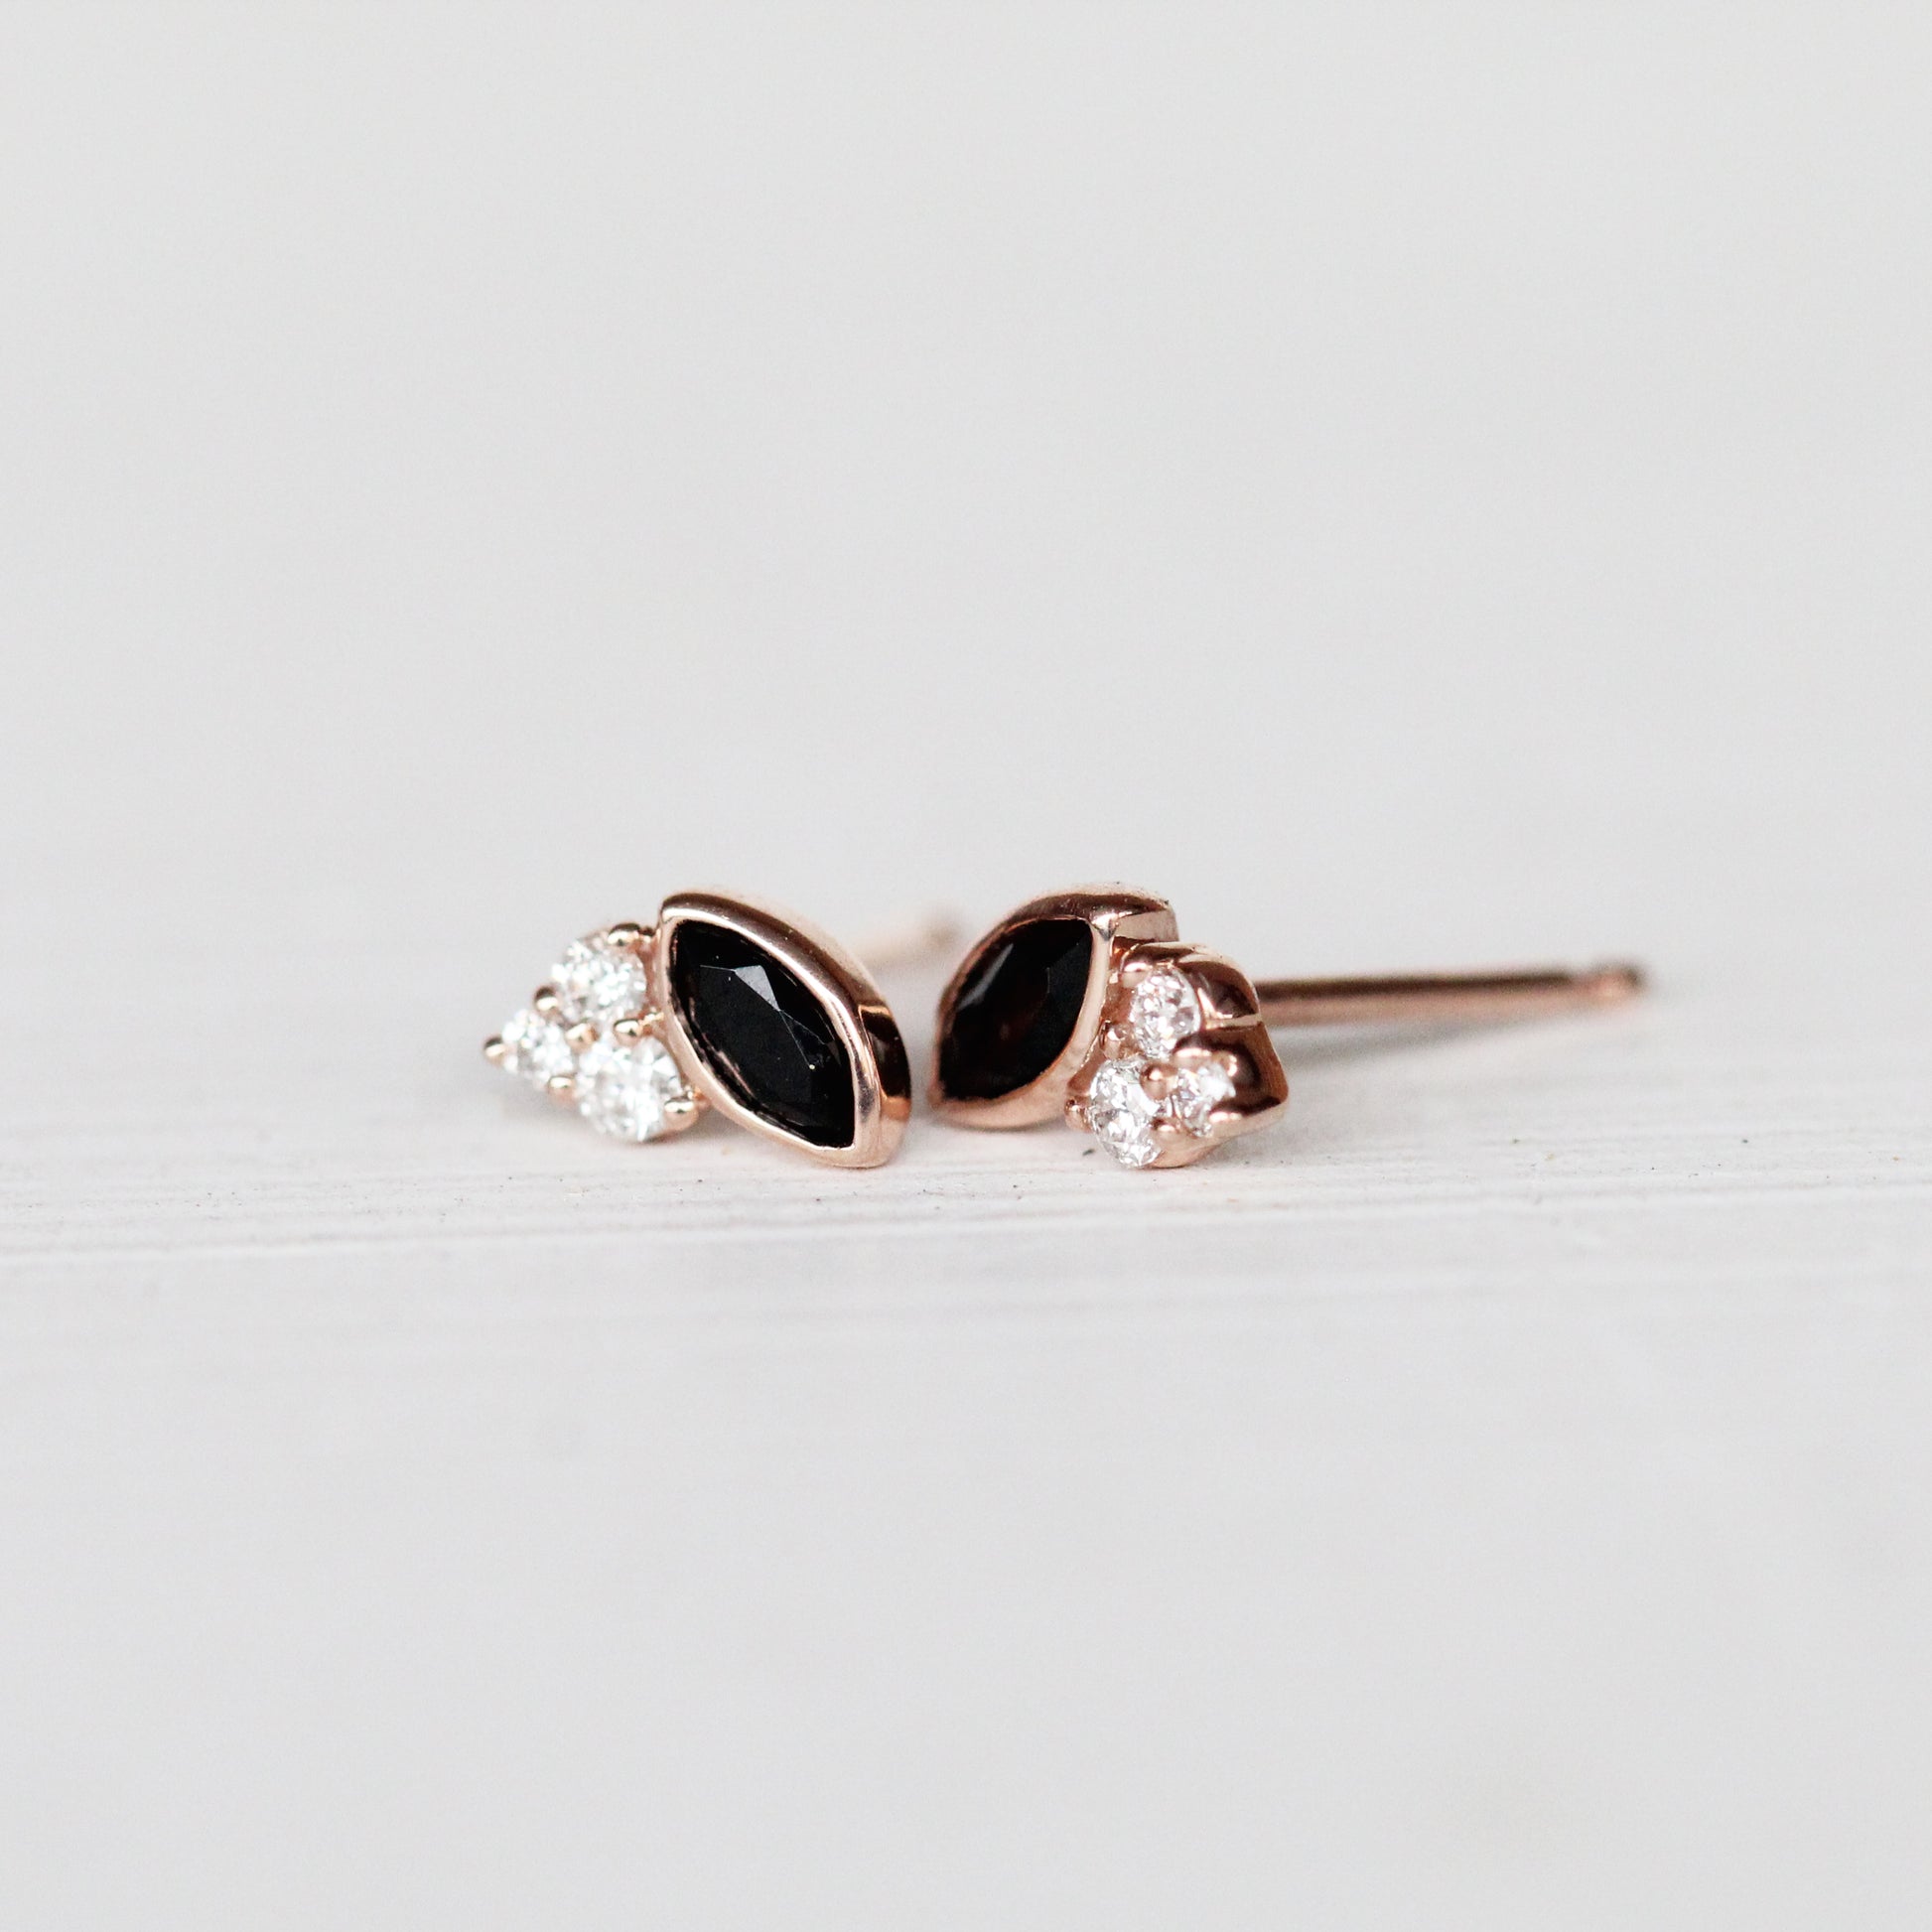 Jolean Earrings with Onyx + Diamonds - 14k Gold - Made to Order - Midwinter Co. Alternative Bridal Rings and Modern Fine Jewelry